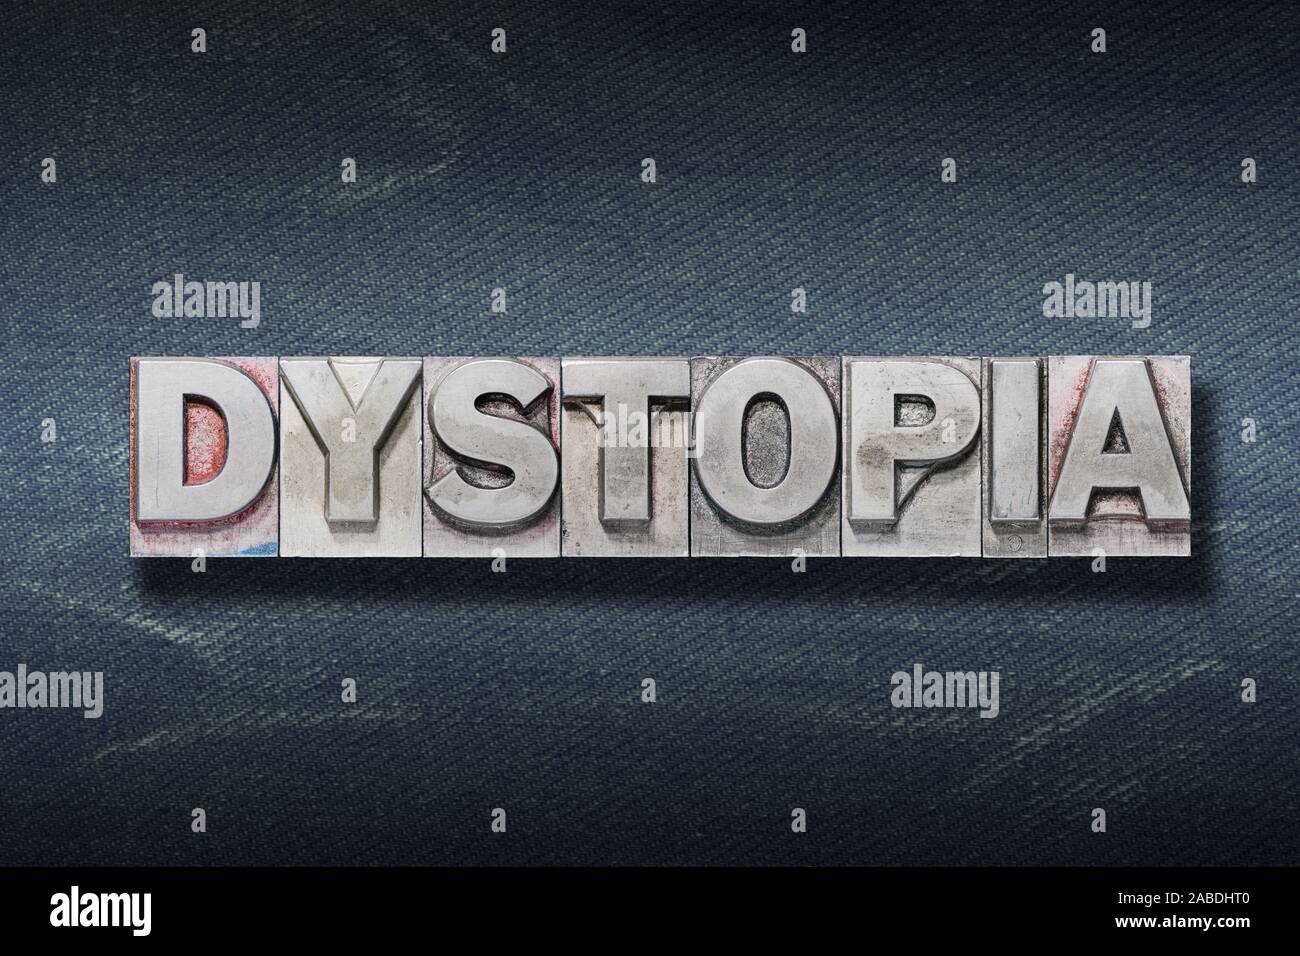 dystopia word made from metallic letterpress on dark jeans background Stock Photo